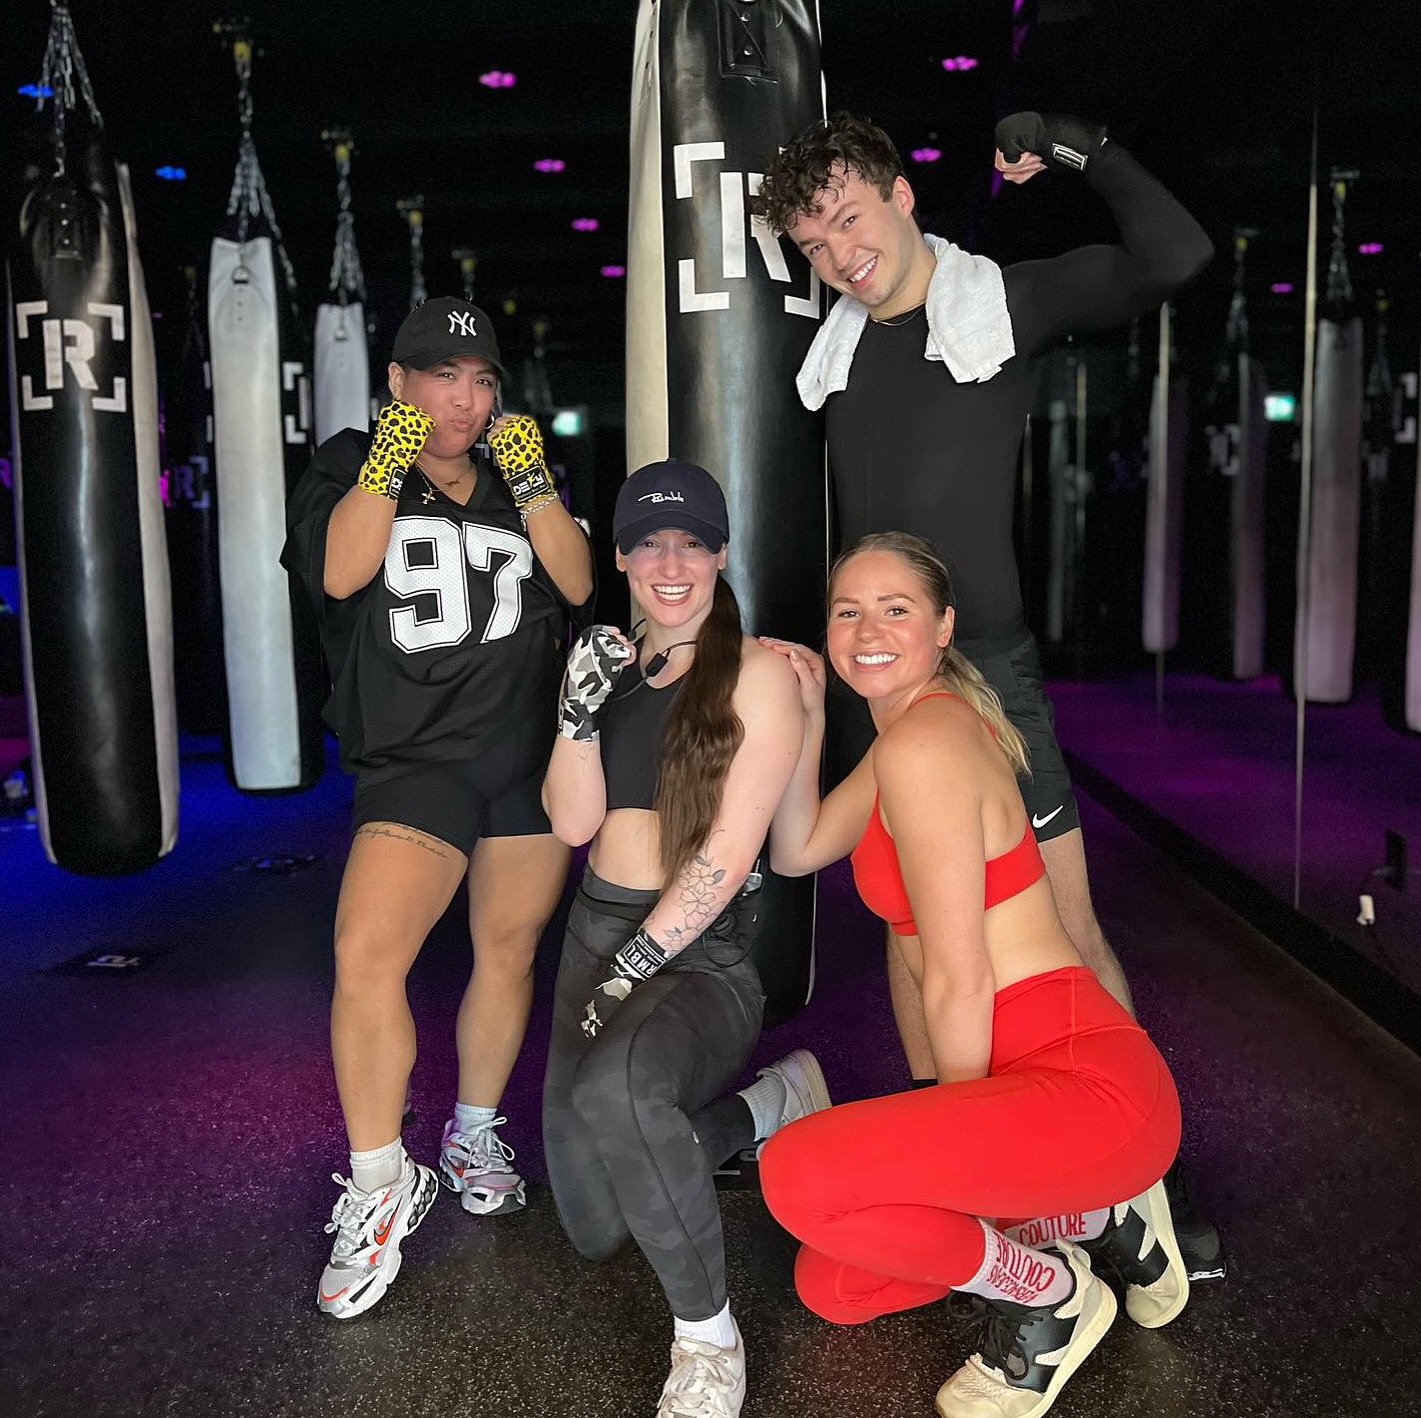 Post-class glow and all smiles with our awesome Rumble Crew 🥊
⠀⠀⠀⠀⠀⠀⠀⠀⠀
Share your post-class glow with your Rumble crew and tag us! 🏷️
⠀⠀⠀⠀⠀⠀⠀⠀⠀
#rumble #rumbleboxing #rumbleboxingstudio #rumblefam #rumblecrew #community #fightclubmeetsnightclub #